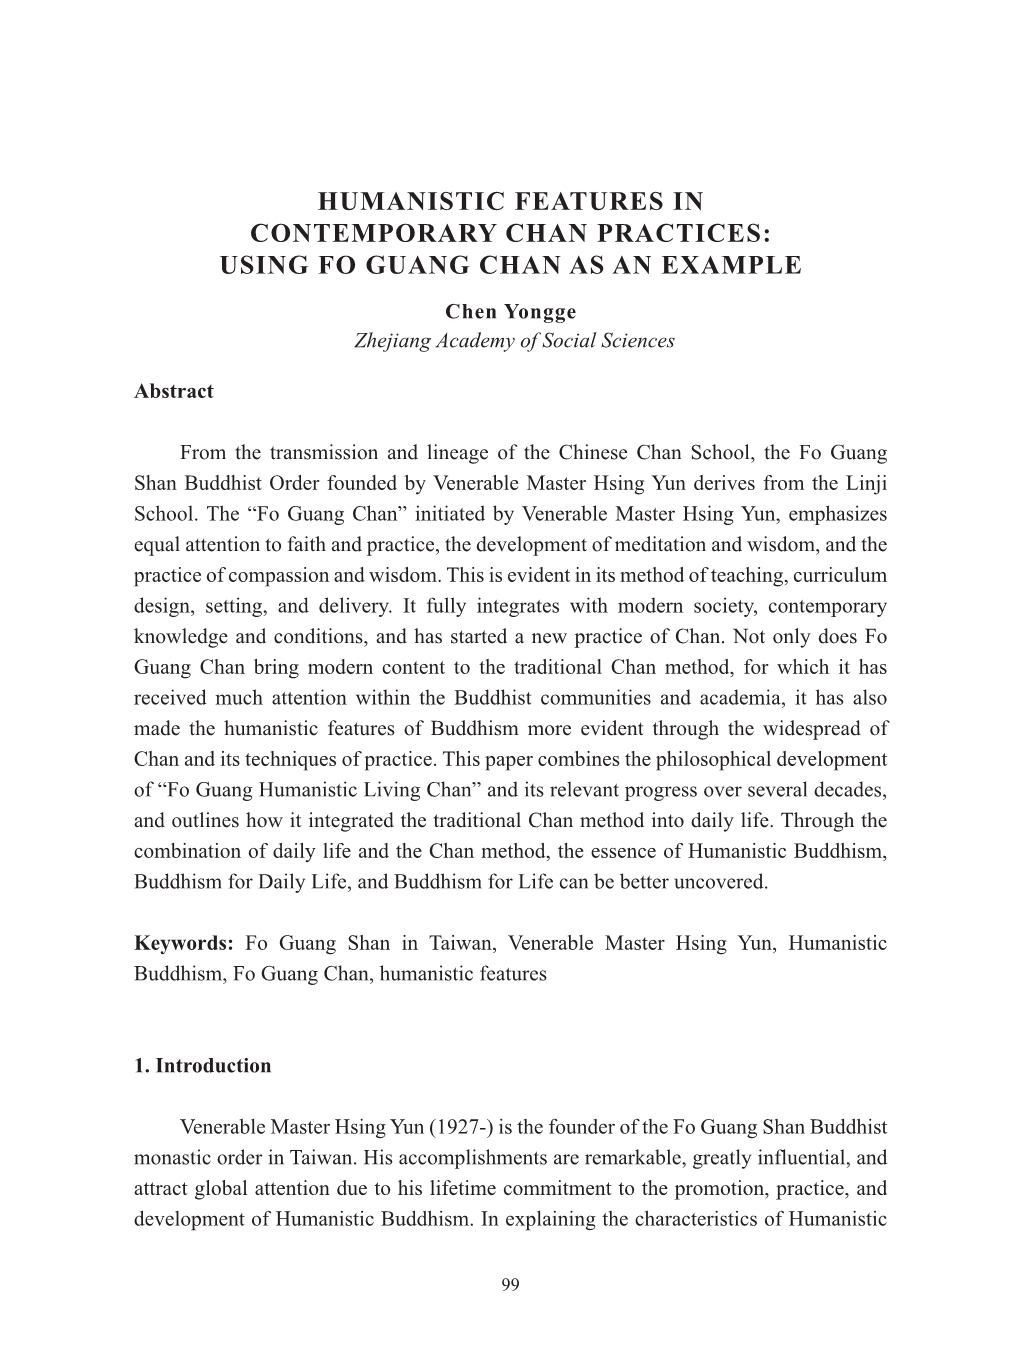 Humanistic Features in Contemporary Chan Practices: Using Fo Guang Chan As an Example